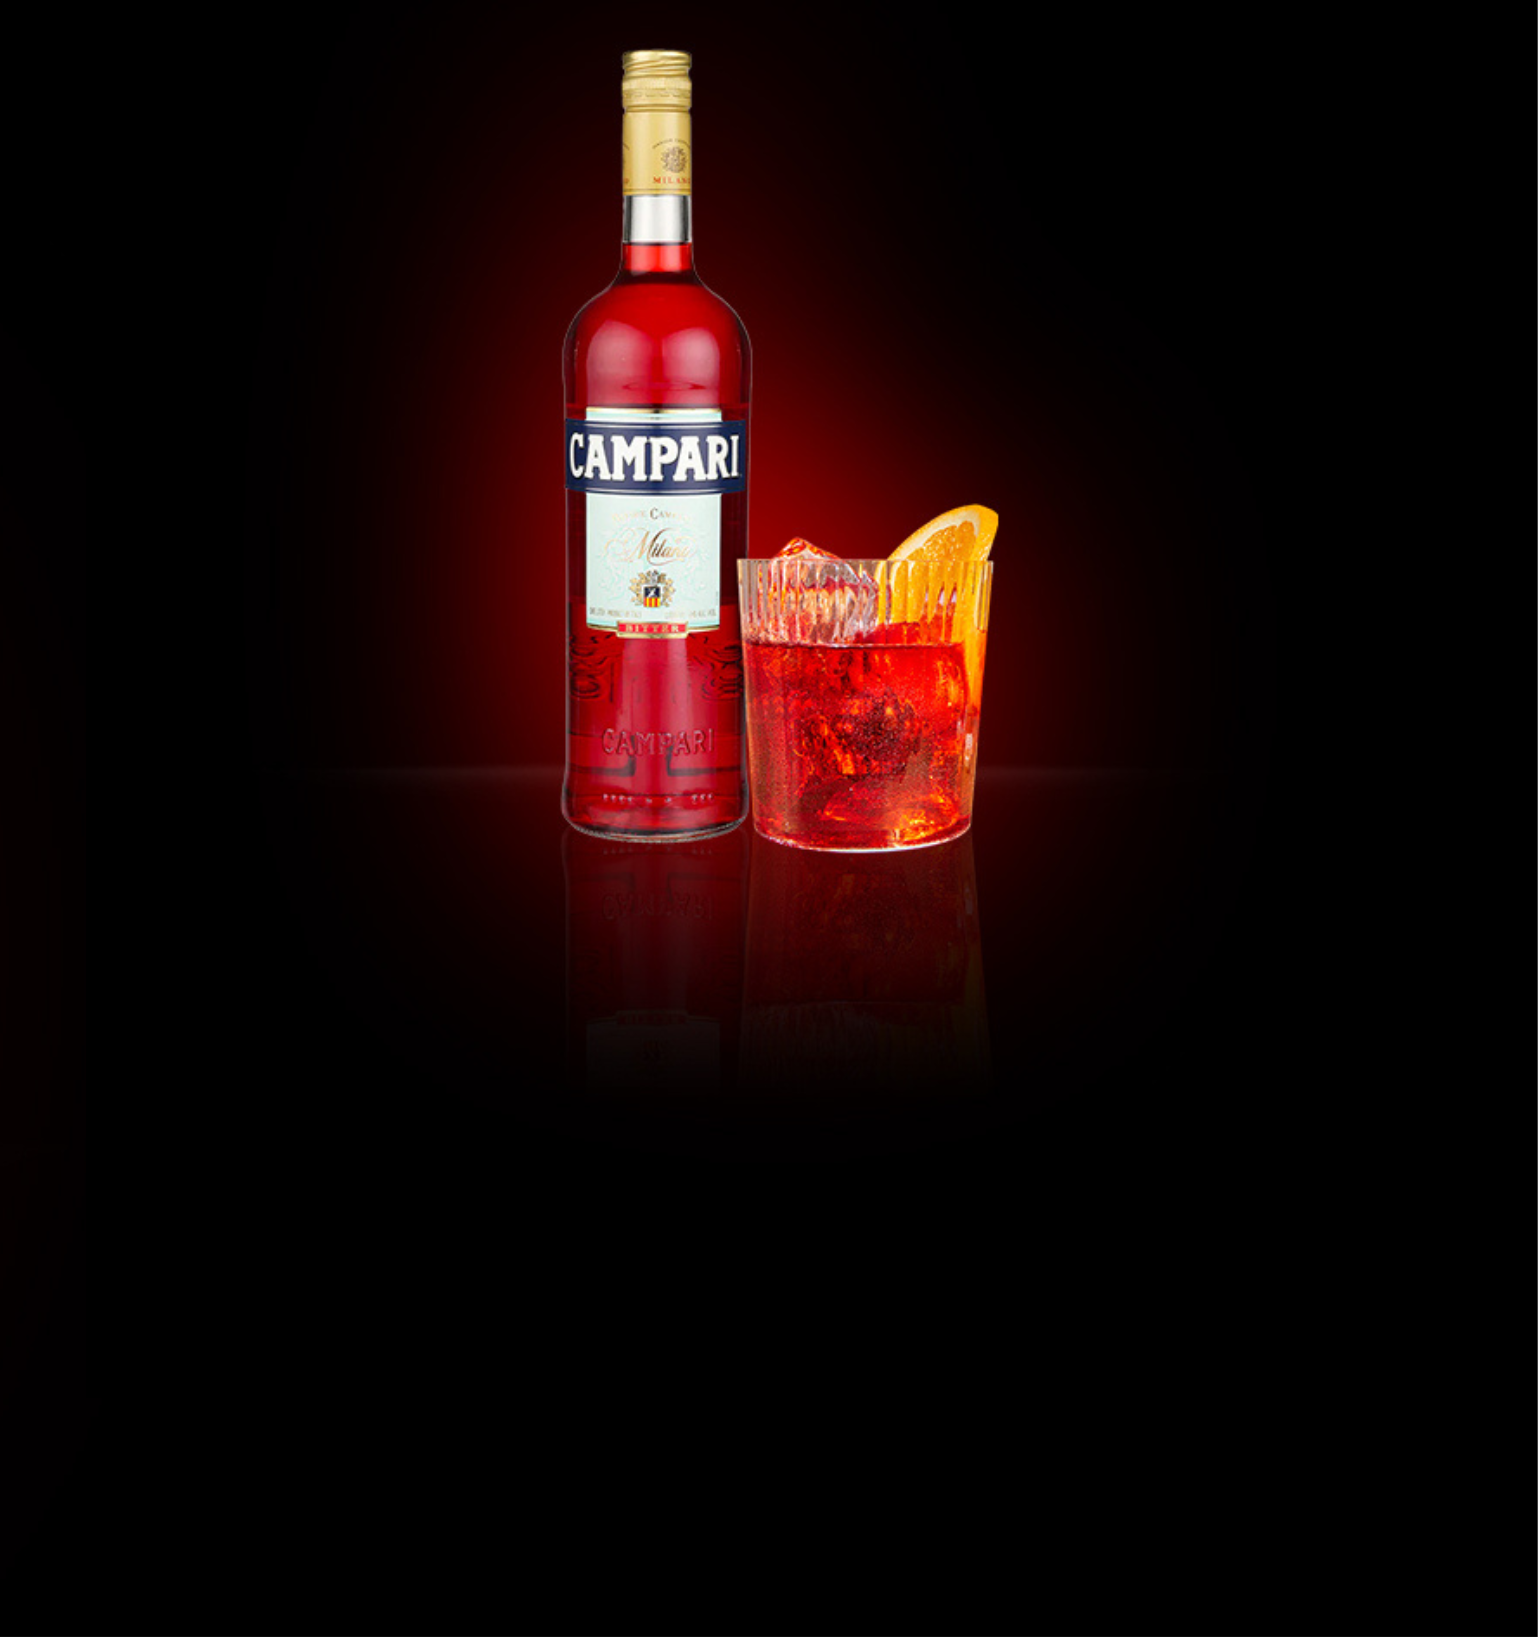 A bottle of Campari with a Kingston Negroni cocktail